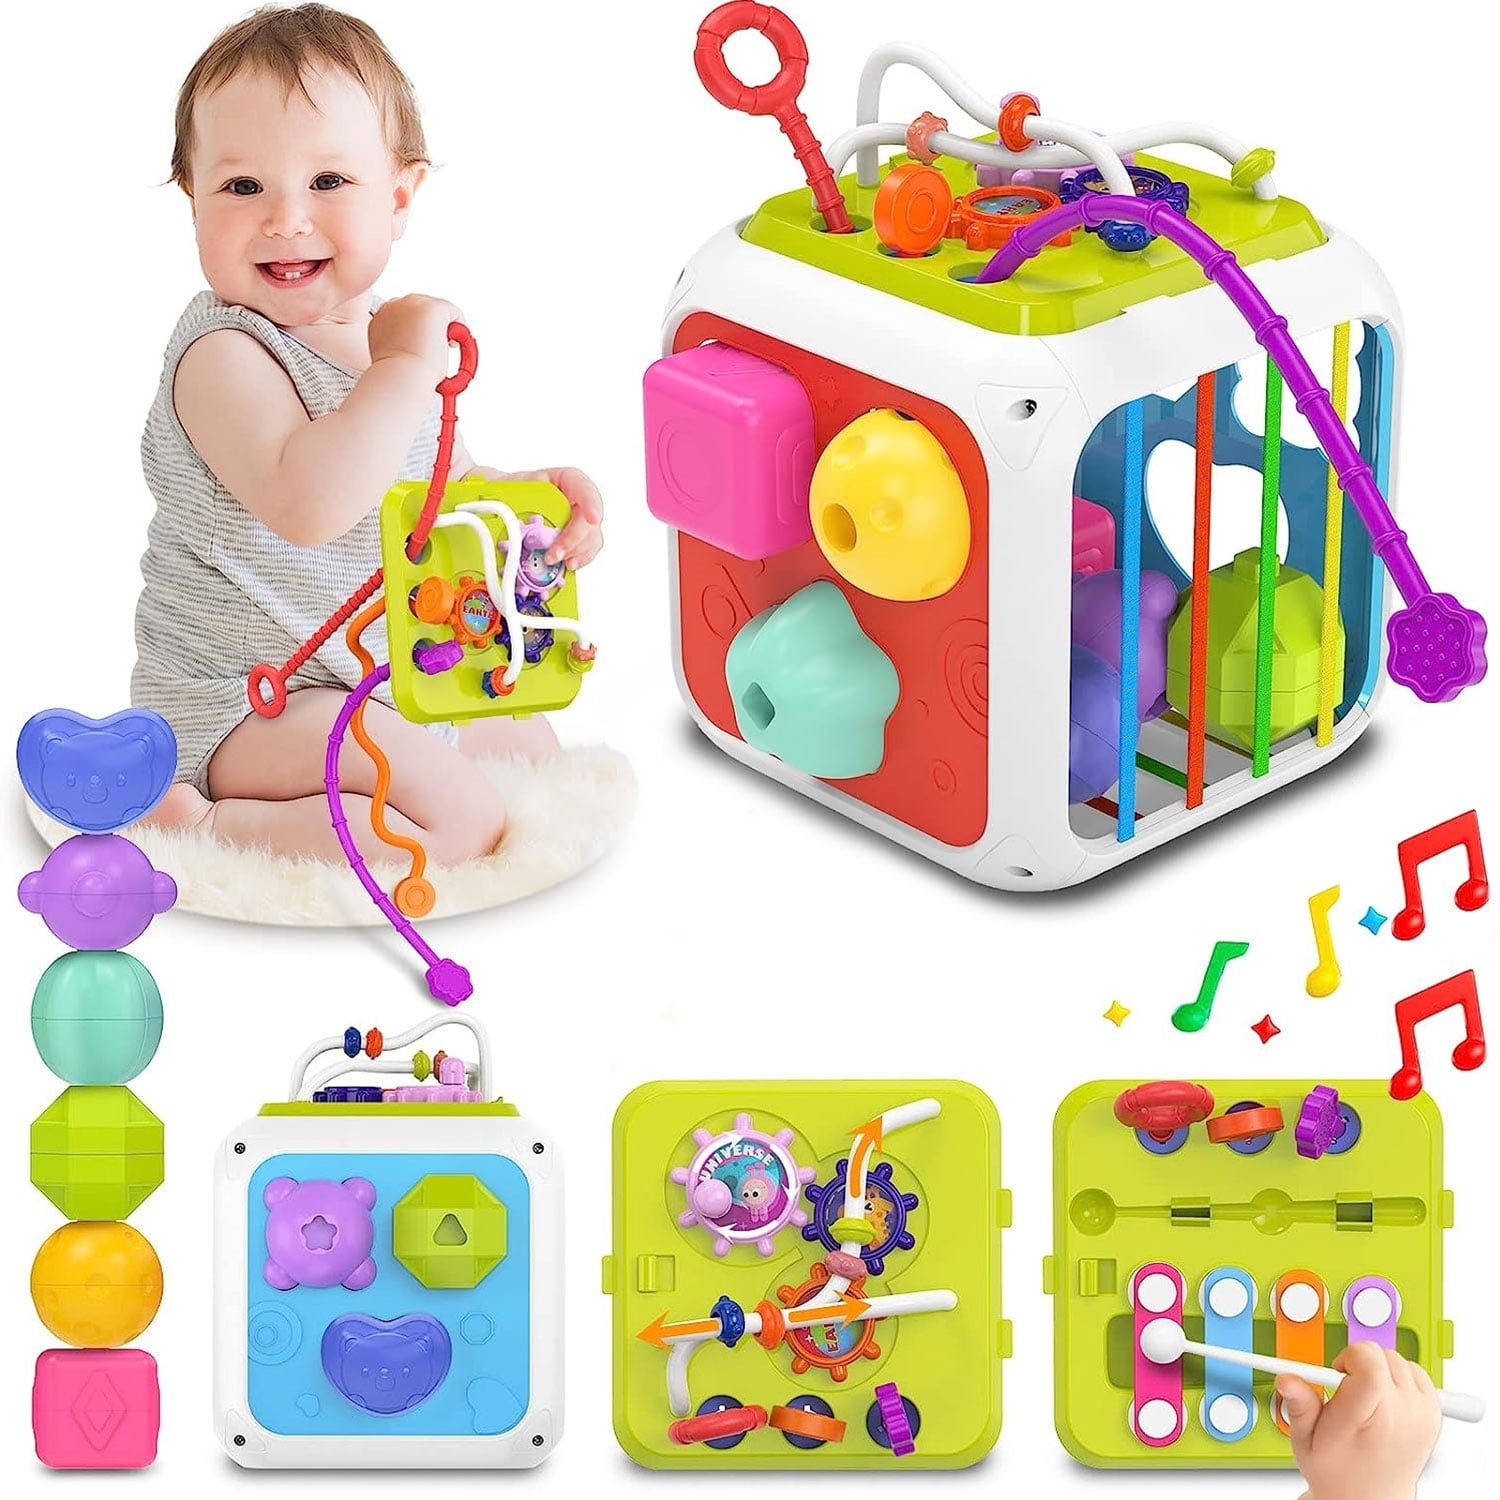 Kid Odyssey 7-in-1 Baby Sensory Montessori Toys for 1 Year Old, Toddler ...